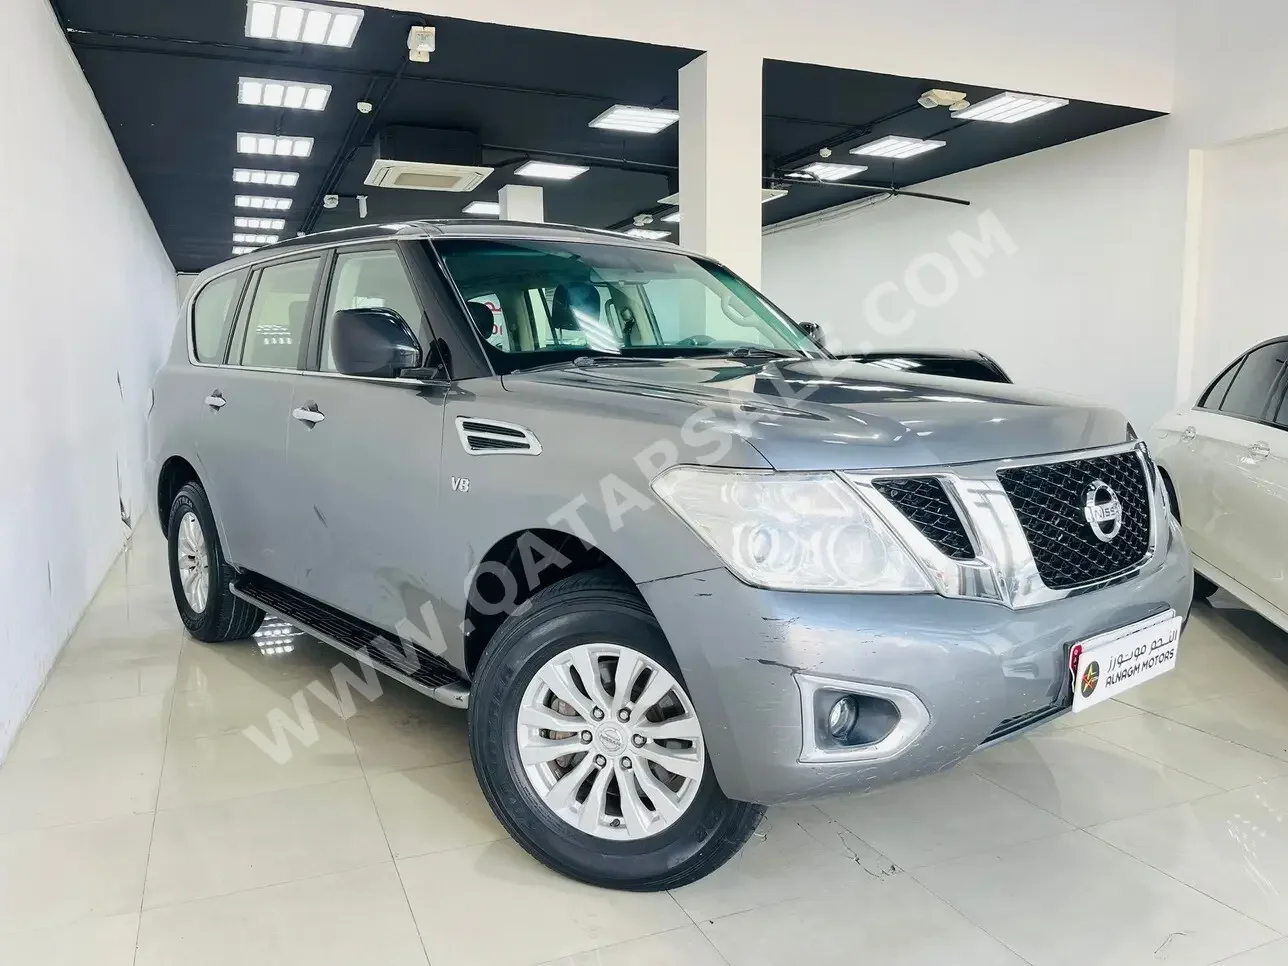 Nissan  Patrol  XE  2014  Automatic  192,000 Km  6 Cylinder  Four Wheel Drive (4WD)  SUV  Gray